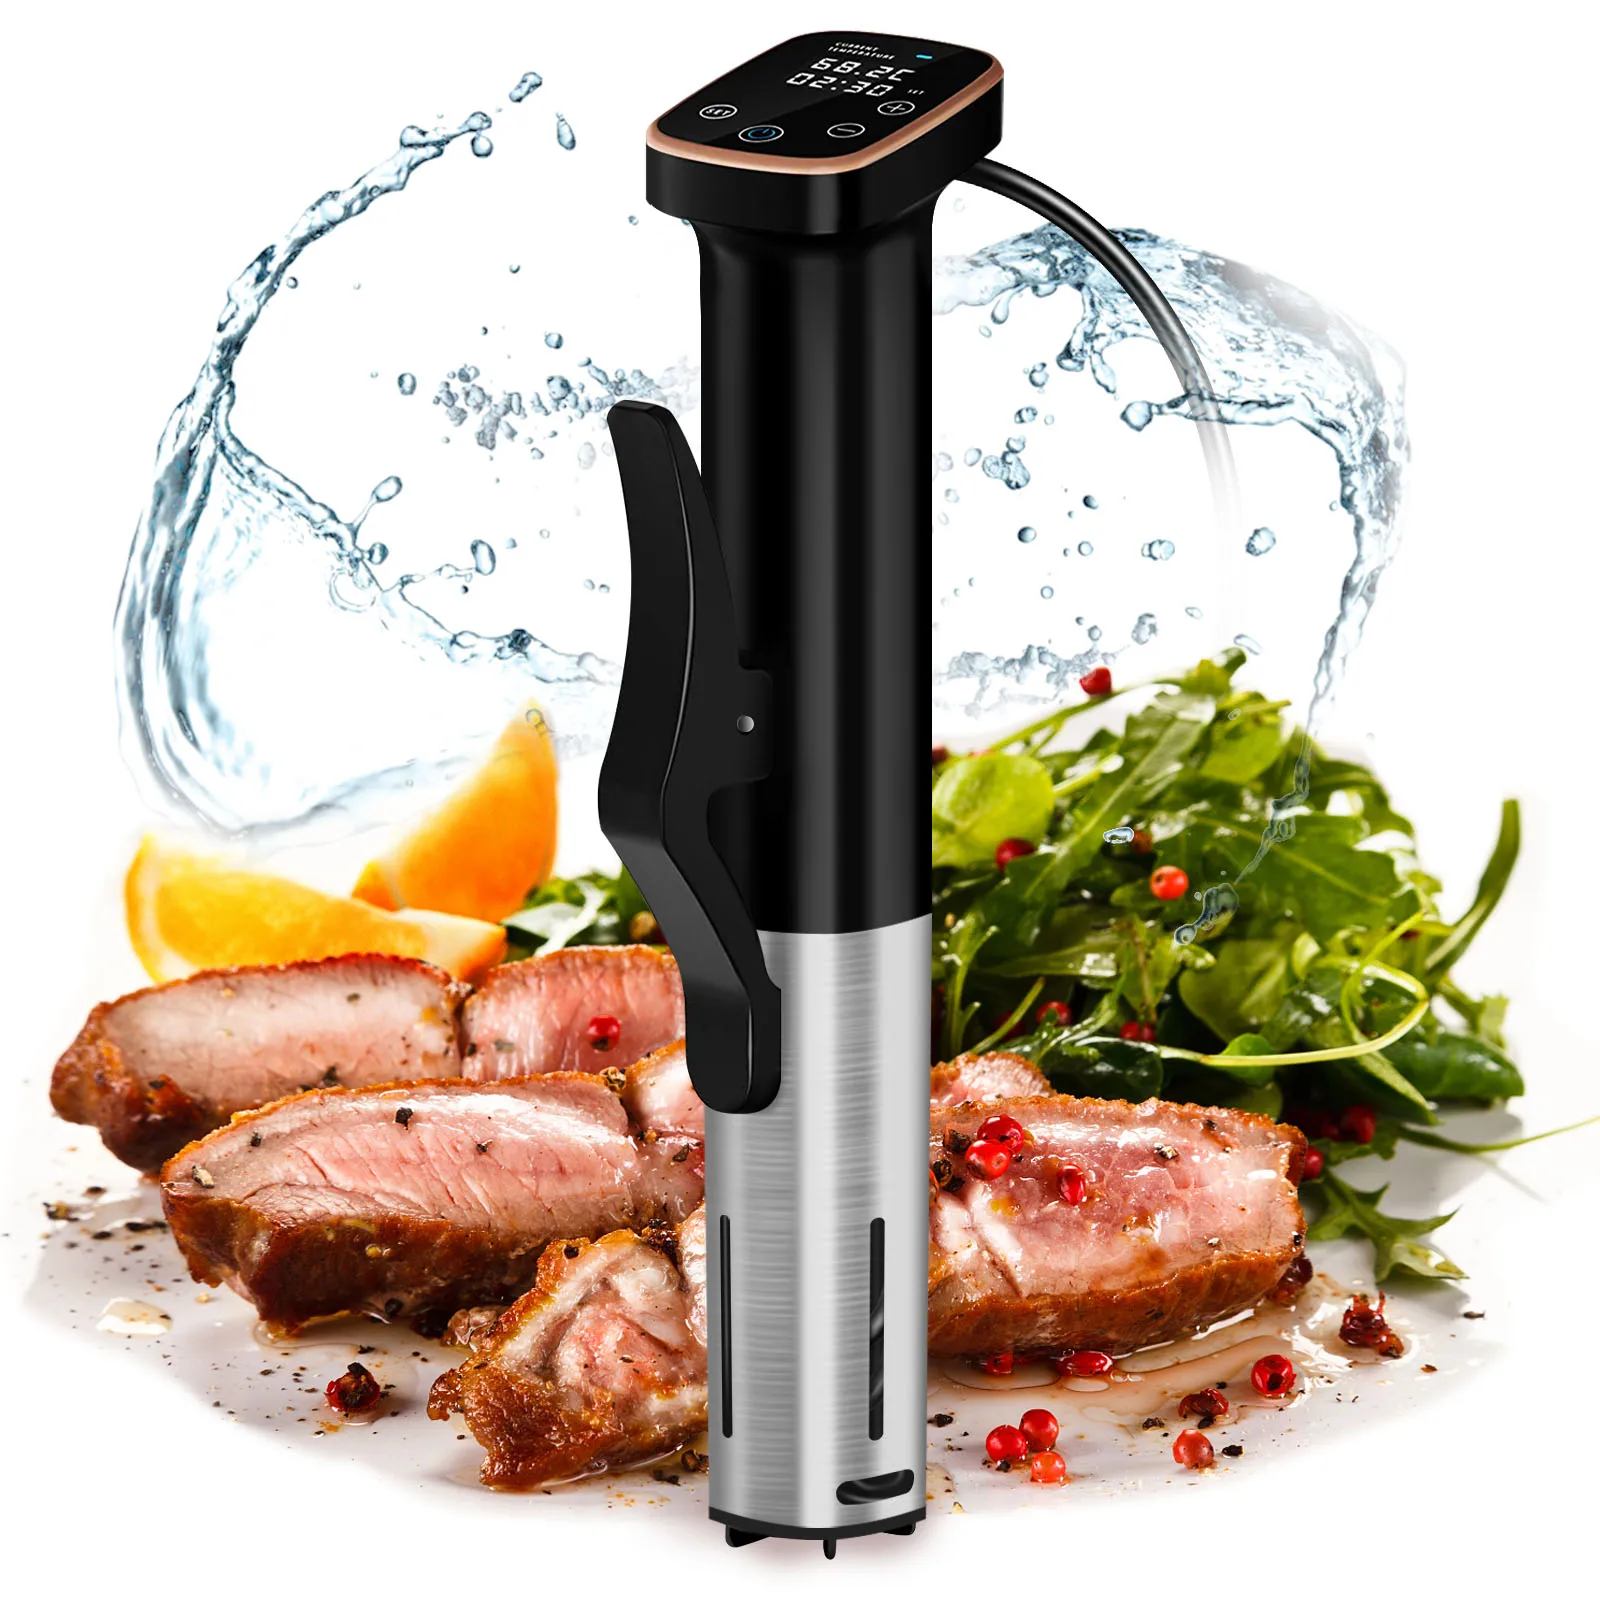 

IPX7 Waterproof Sous Vide Cooker 1100W Immersion Circulator Vacuum Slow Cooker with LCD Digital Accurate Control Slow Cooker